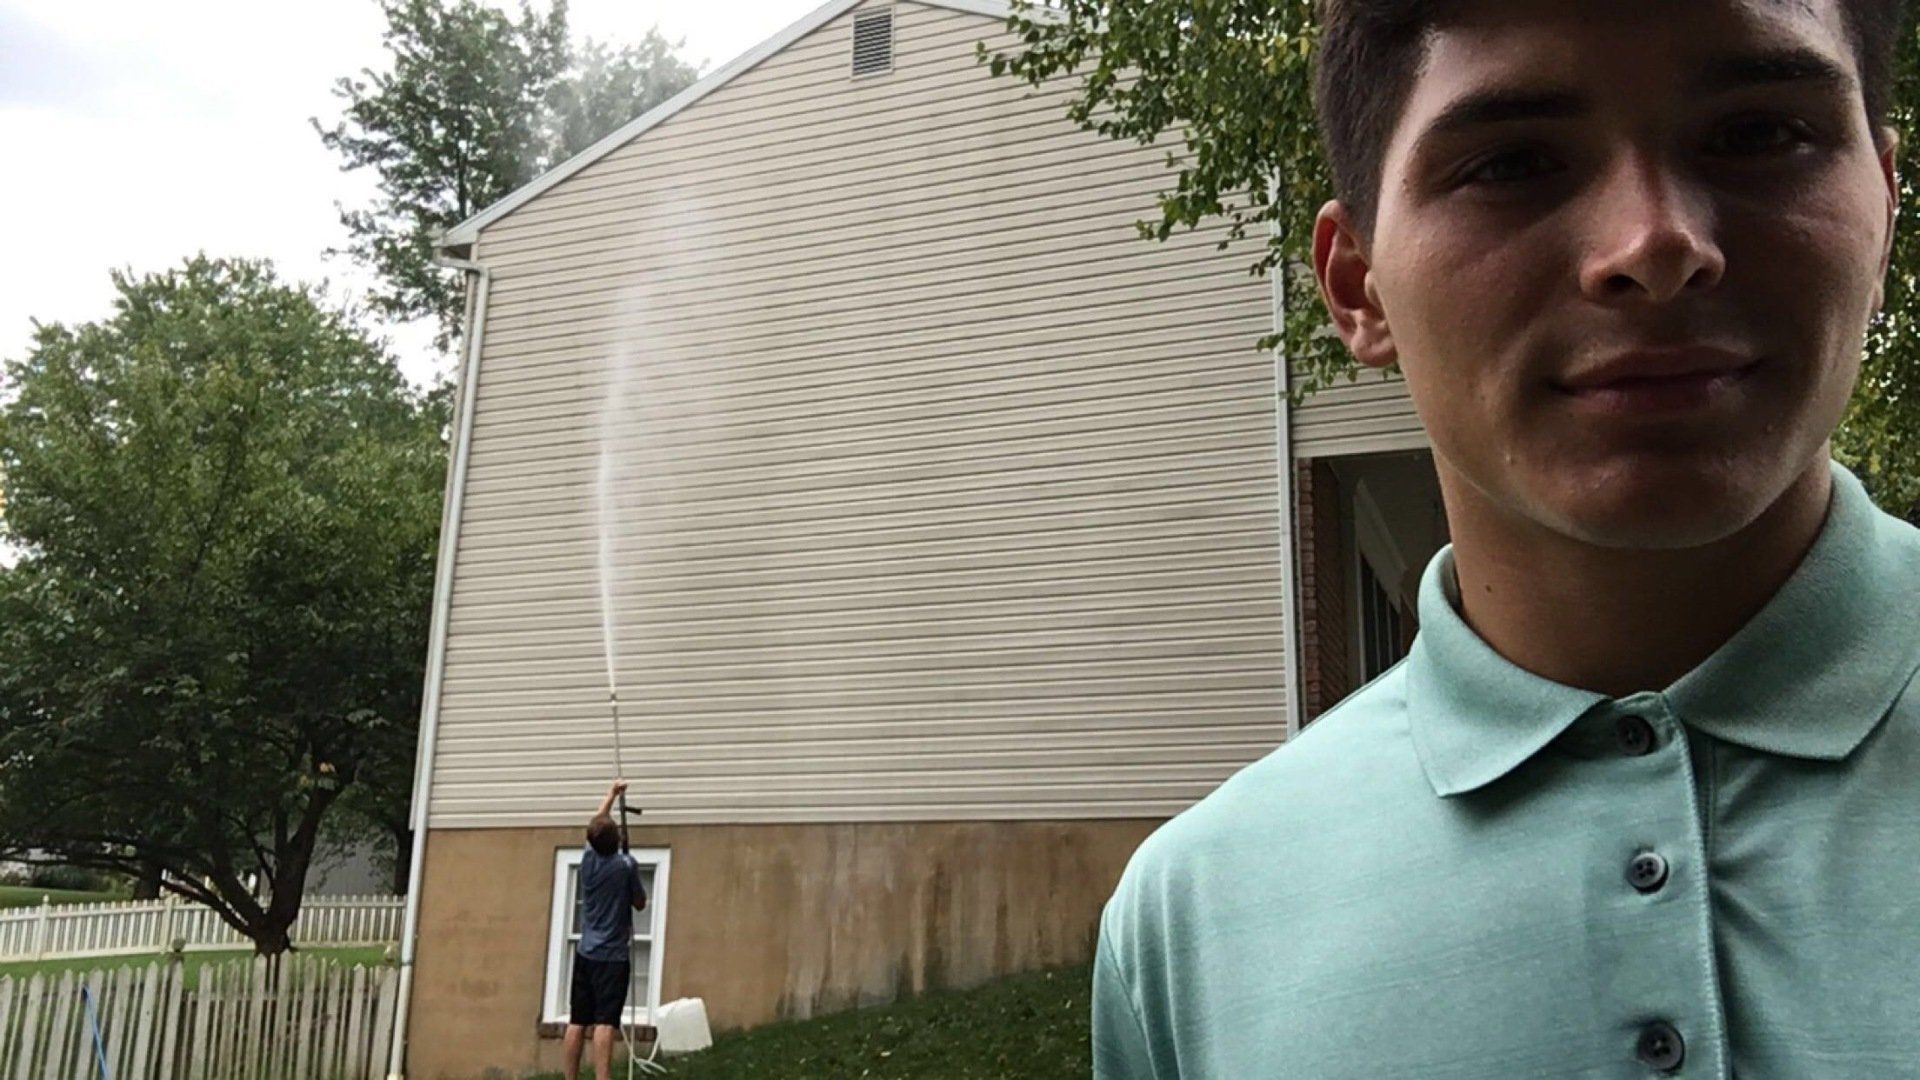 A man in a green shirt is standing in front of a house.